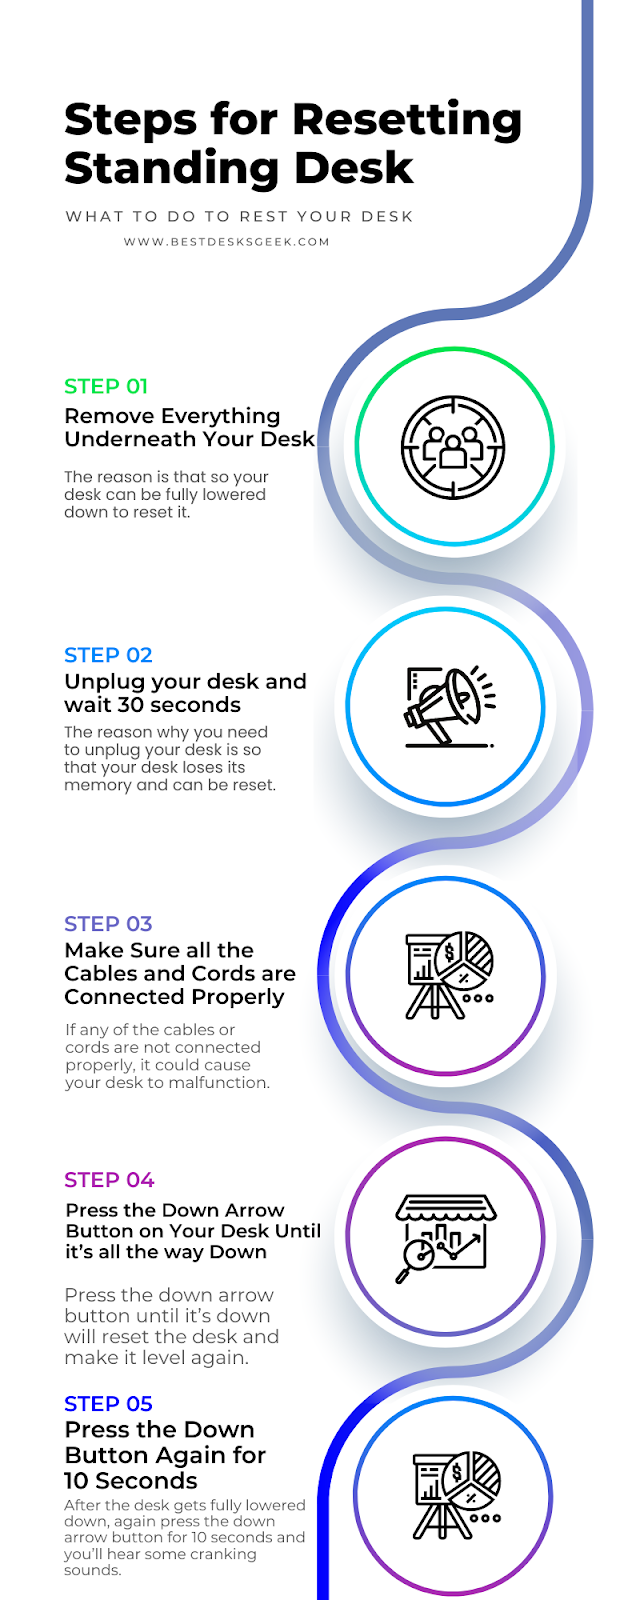 An infographic showing 5 Steps for Resetting Standing Desk